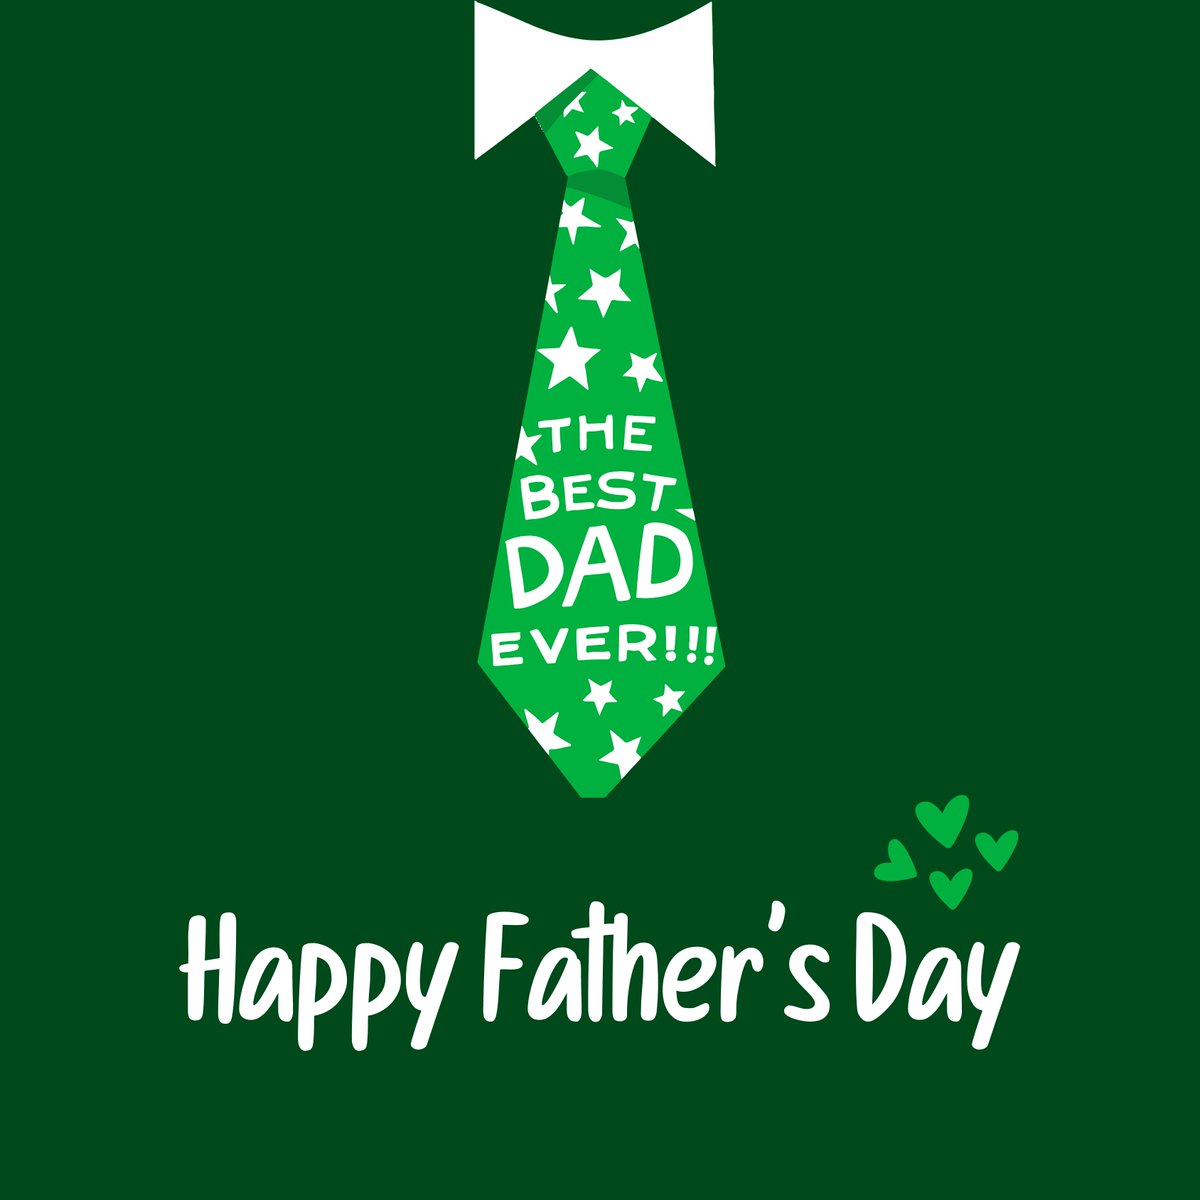 Happy #FathersDay to all the amazing dads and father figures out there! 👨‍👧‍👦 Today, @marshallu @herdacademics celebrates the strength, guidance, and love you provide. #dadsday